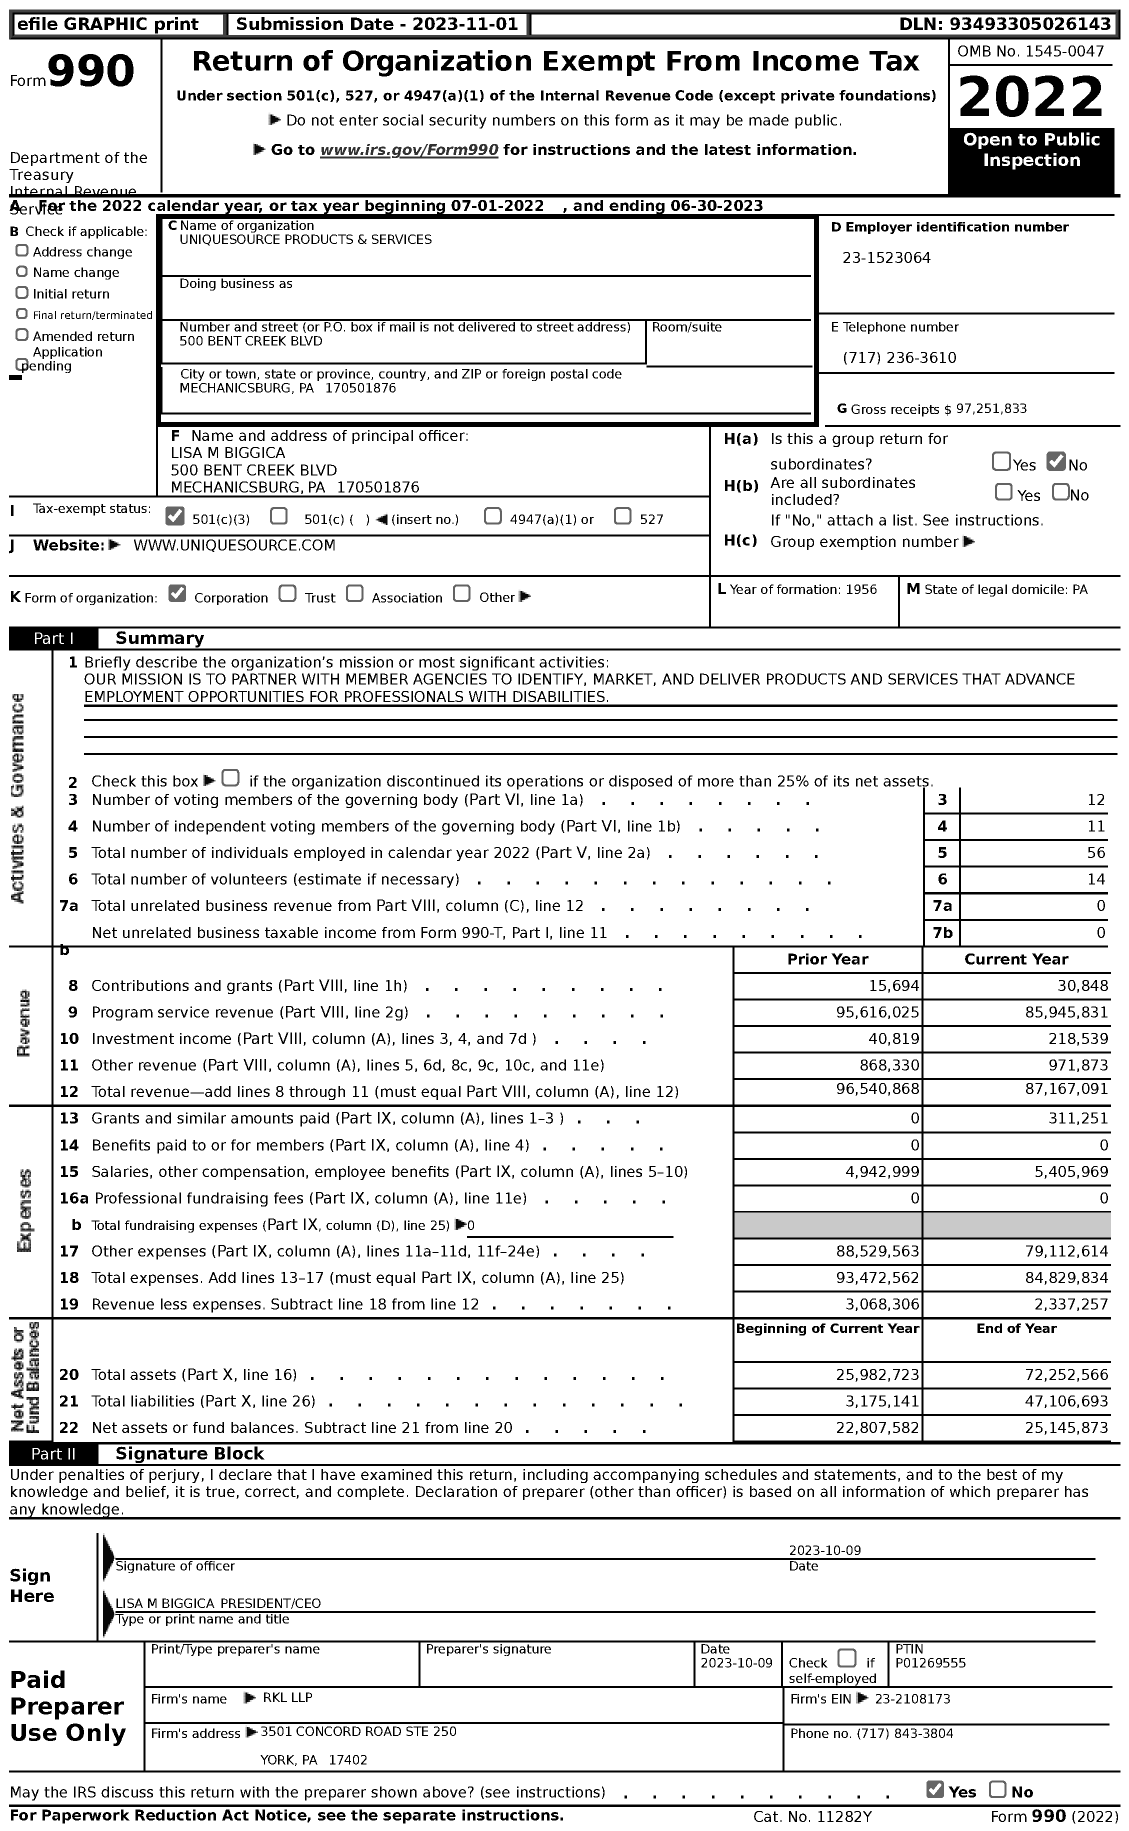 Image of first page of 2022 Form 990 for UniqueSource Products & Services